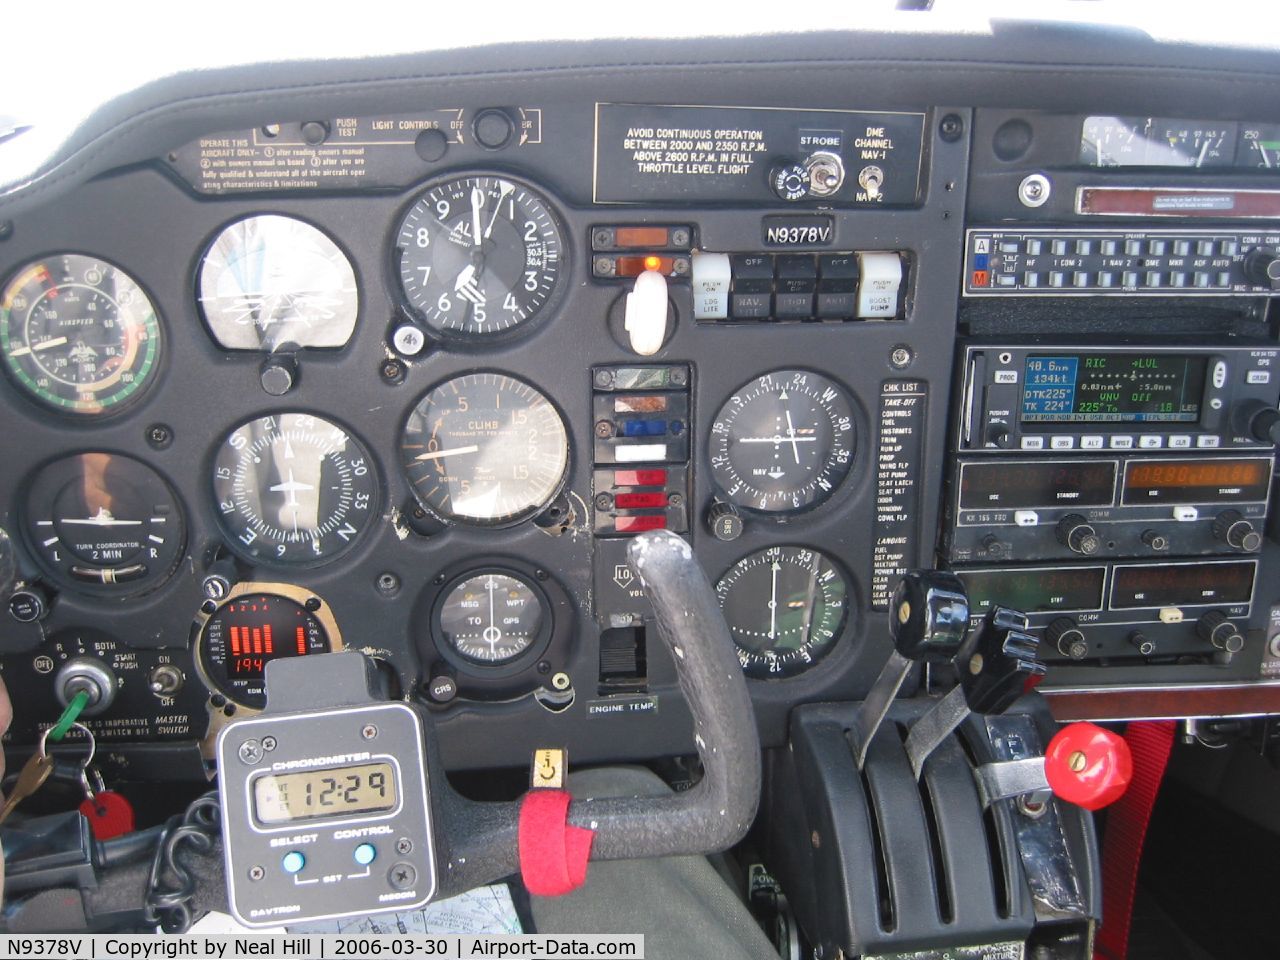 N9378V, 1969 Mooney M20F Executive C/N 700016, Airplane's instrument panel- equipped with two VOR and two COM radios (King KX155's), a color approach-approved GPS (King KLN-94), a King KT-76A transponder, a King KN-64 DME, a JPI EDM-700 digital engine monitor, and standard factory instruments.